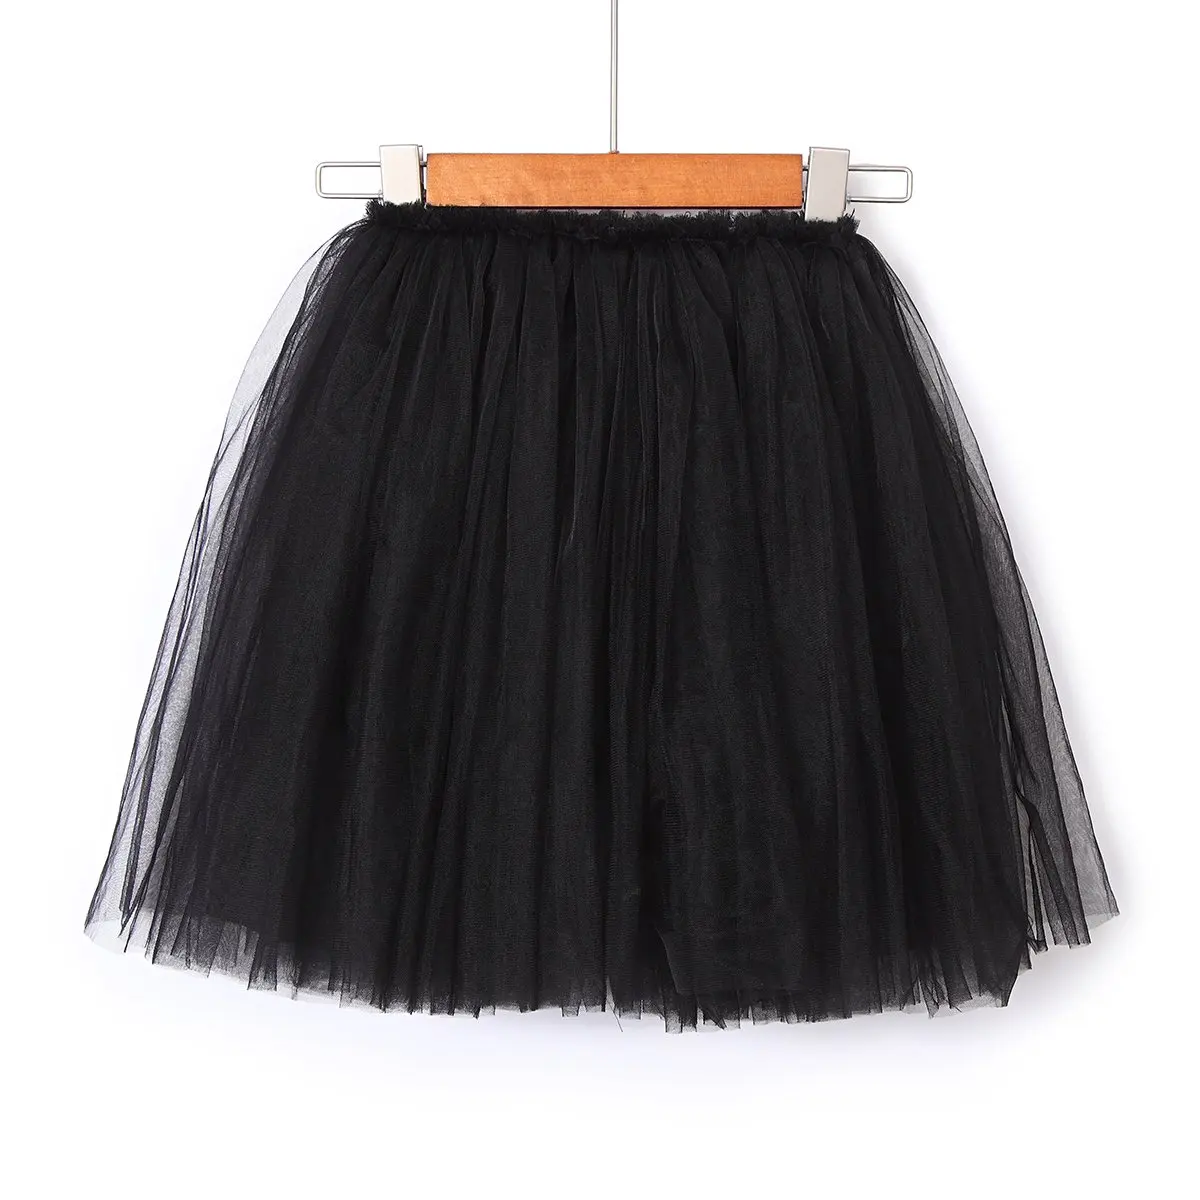 Cheap Big Puffy Skirt, find Big Puffy Skirt deals on line at Alibaba.com